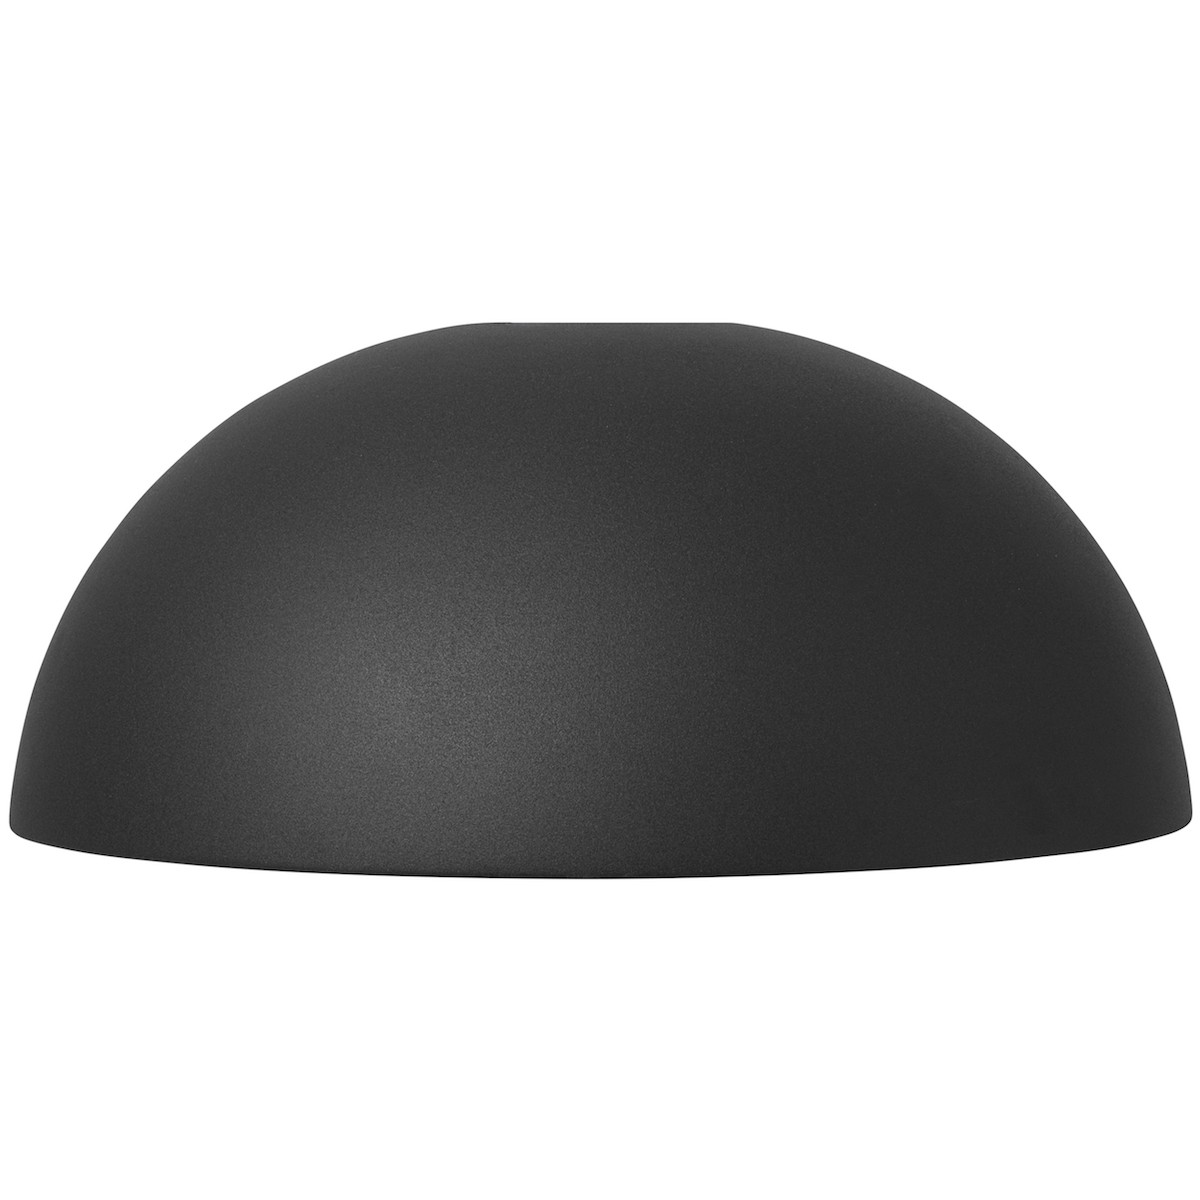 black - Dome shade - Collect Lighting